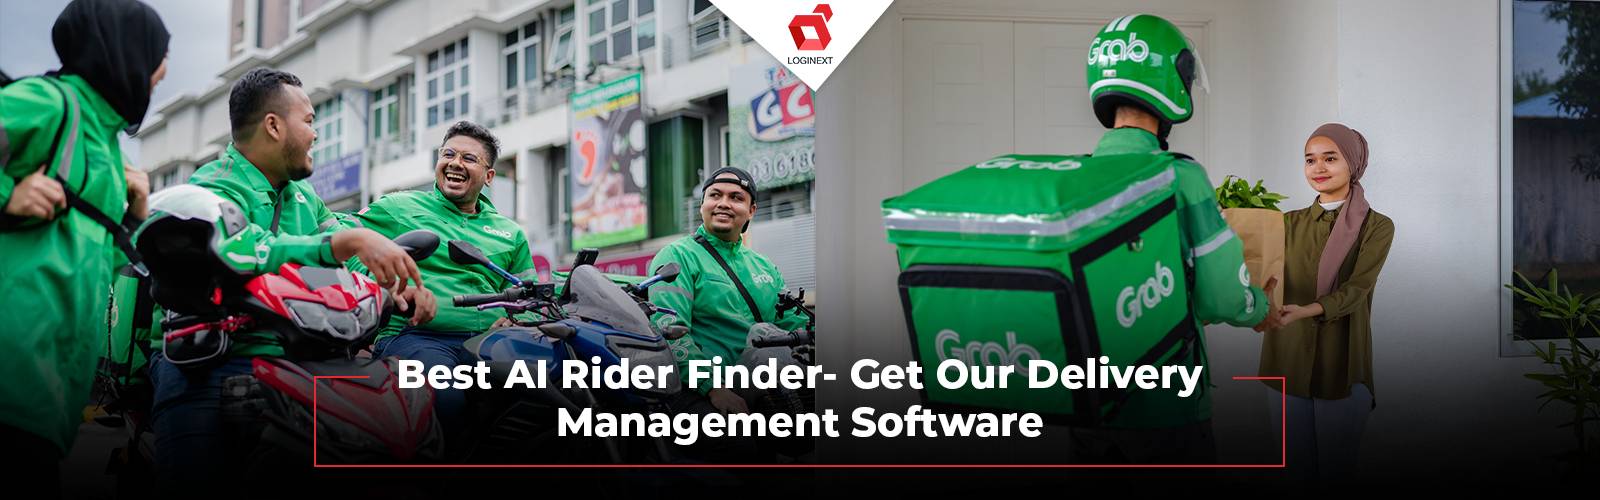 Delivery Management Software With AI Rider Finder